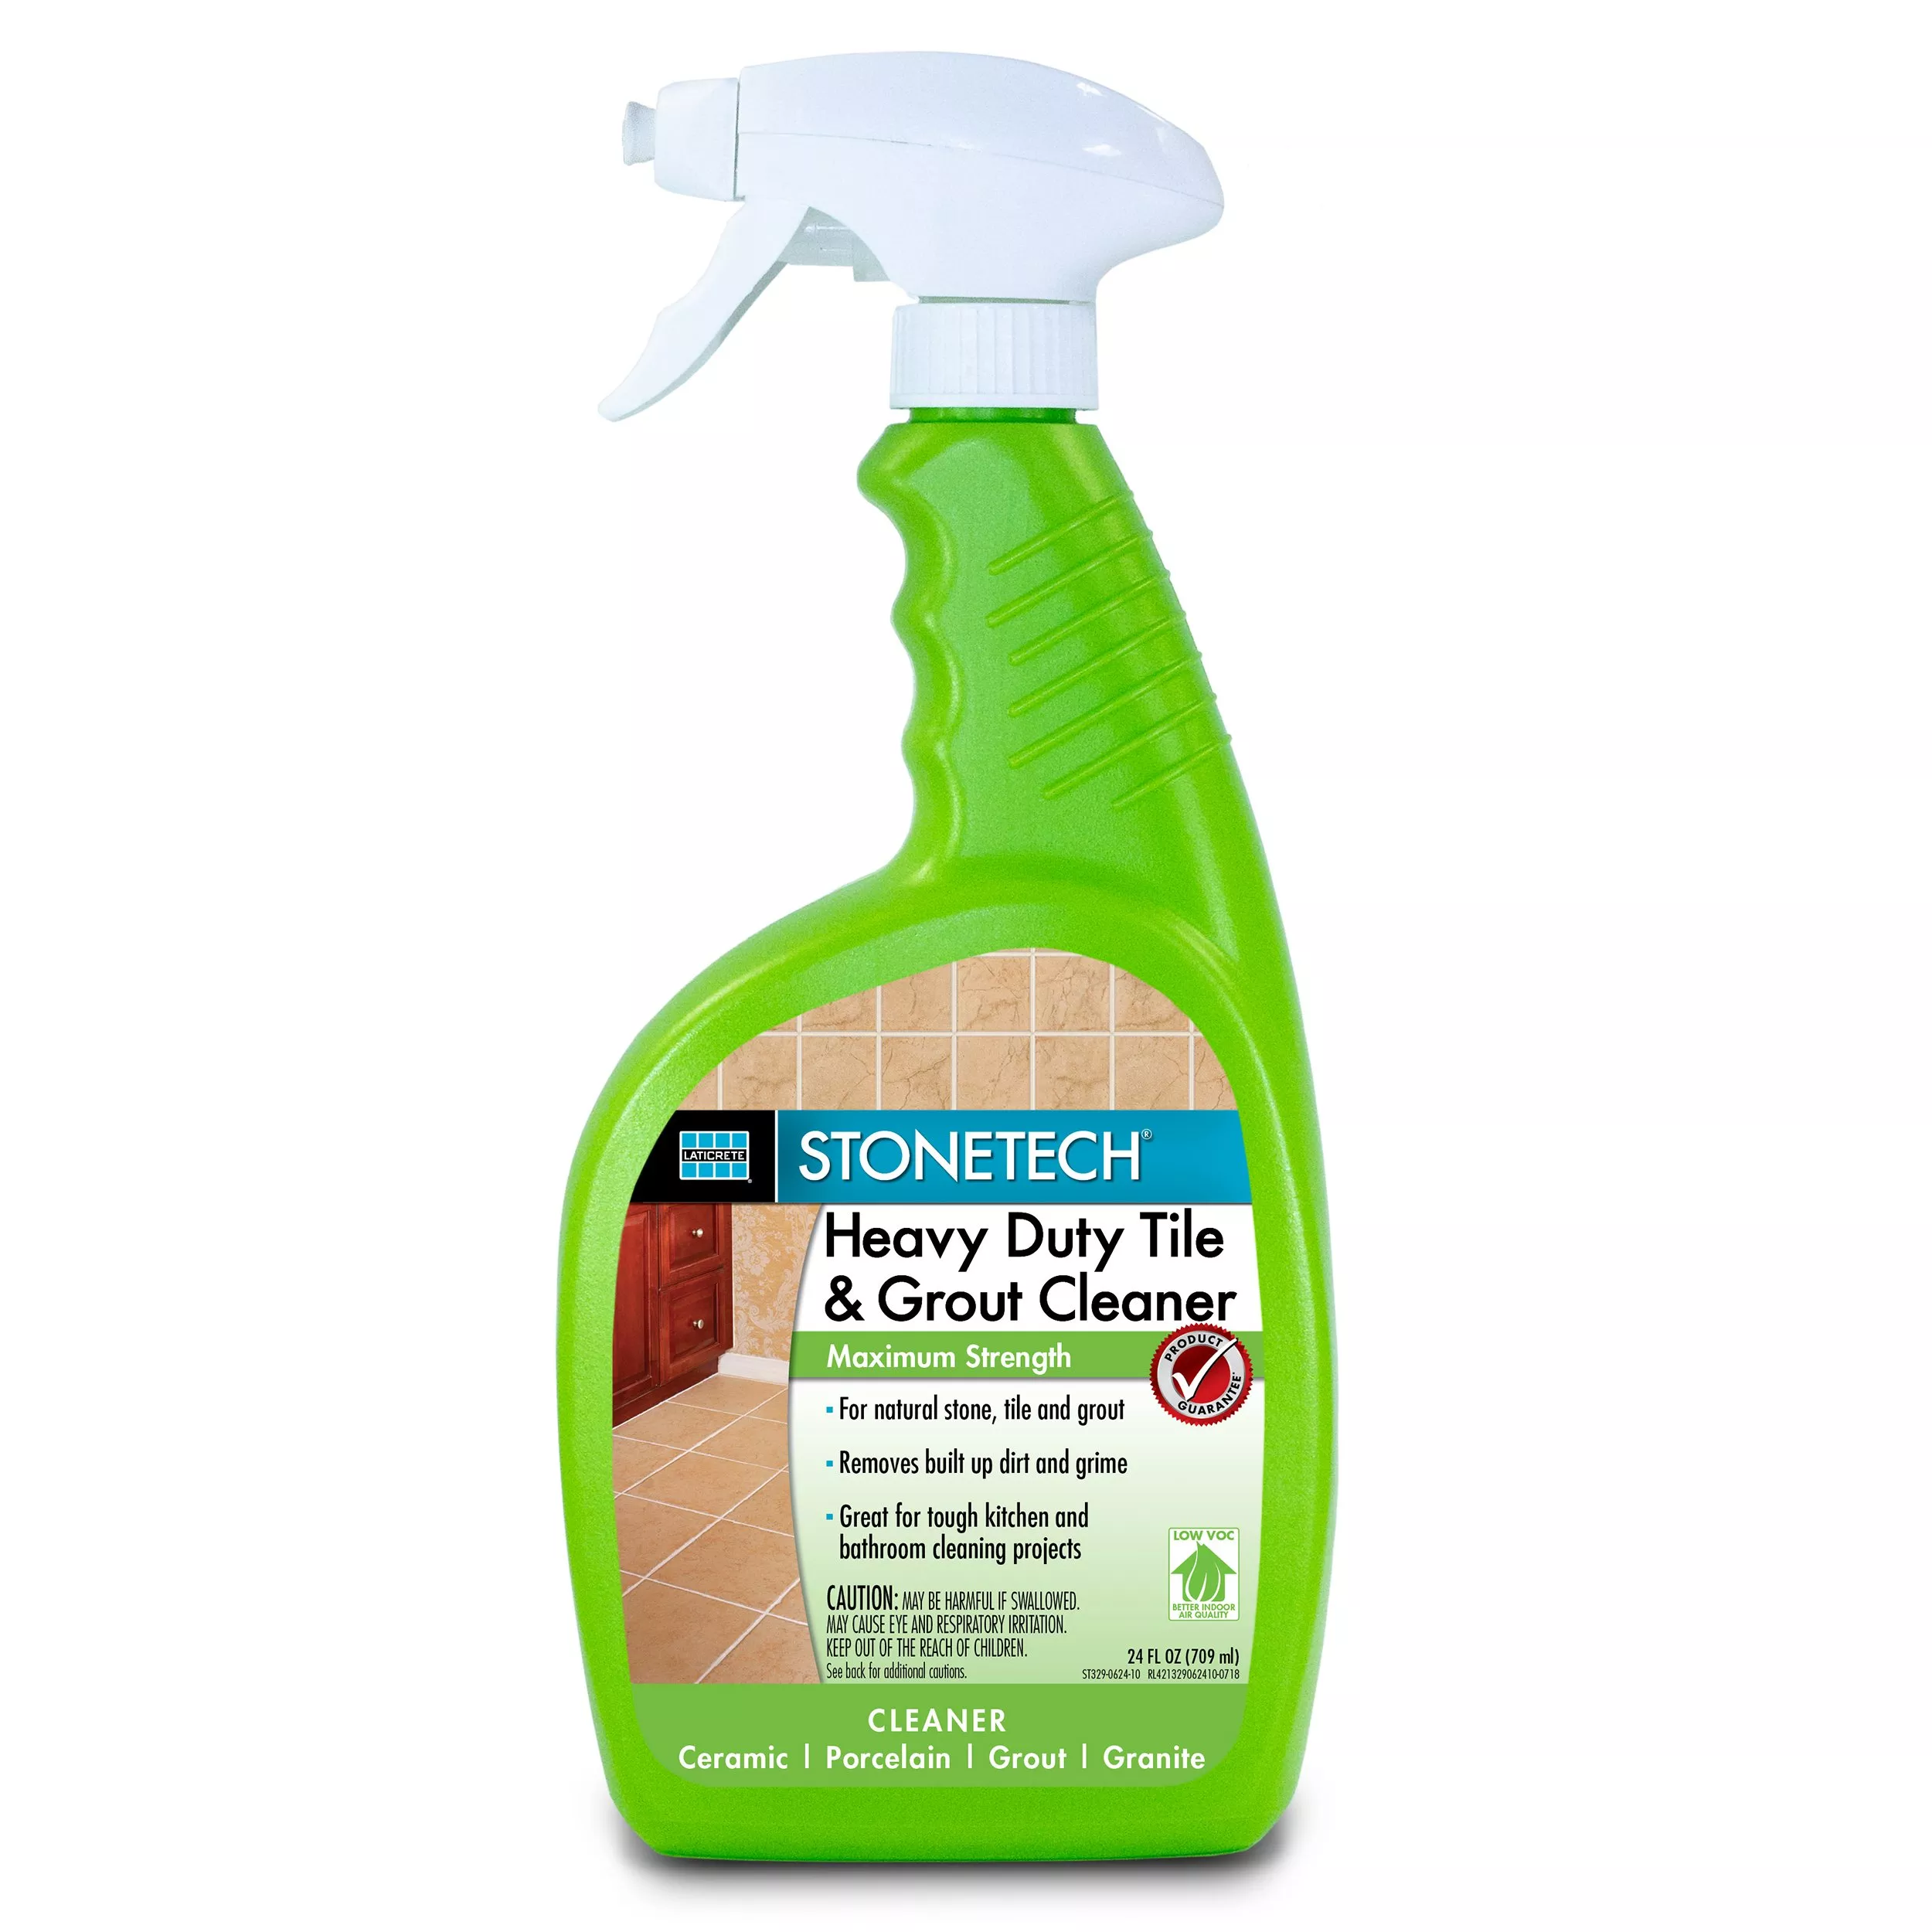 StonePro Tile & Grout Cleaner